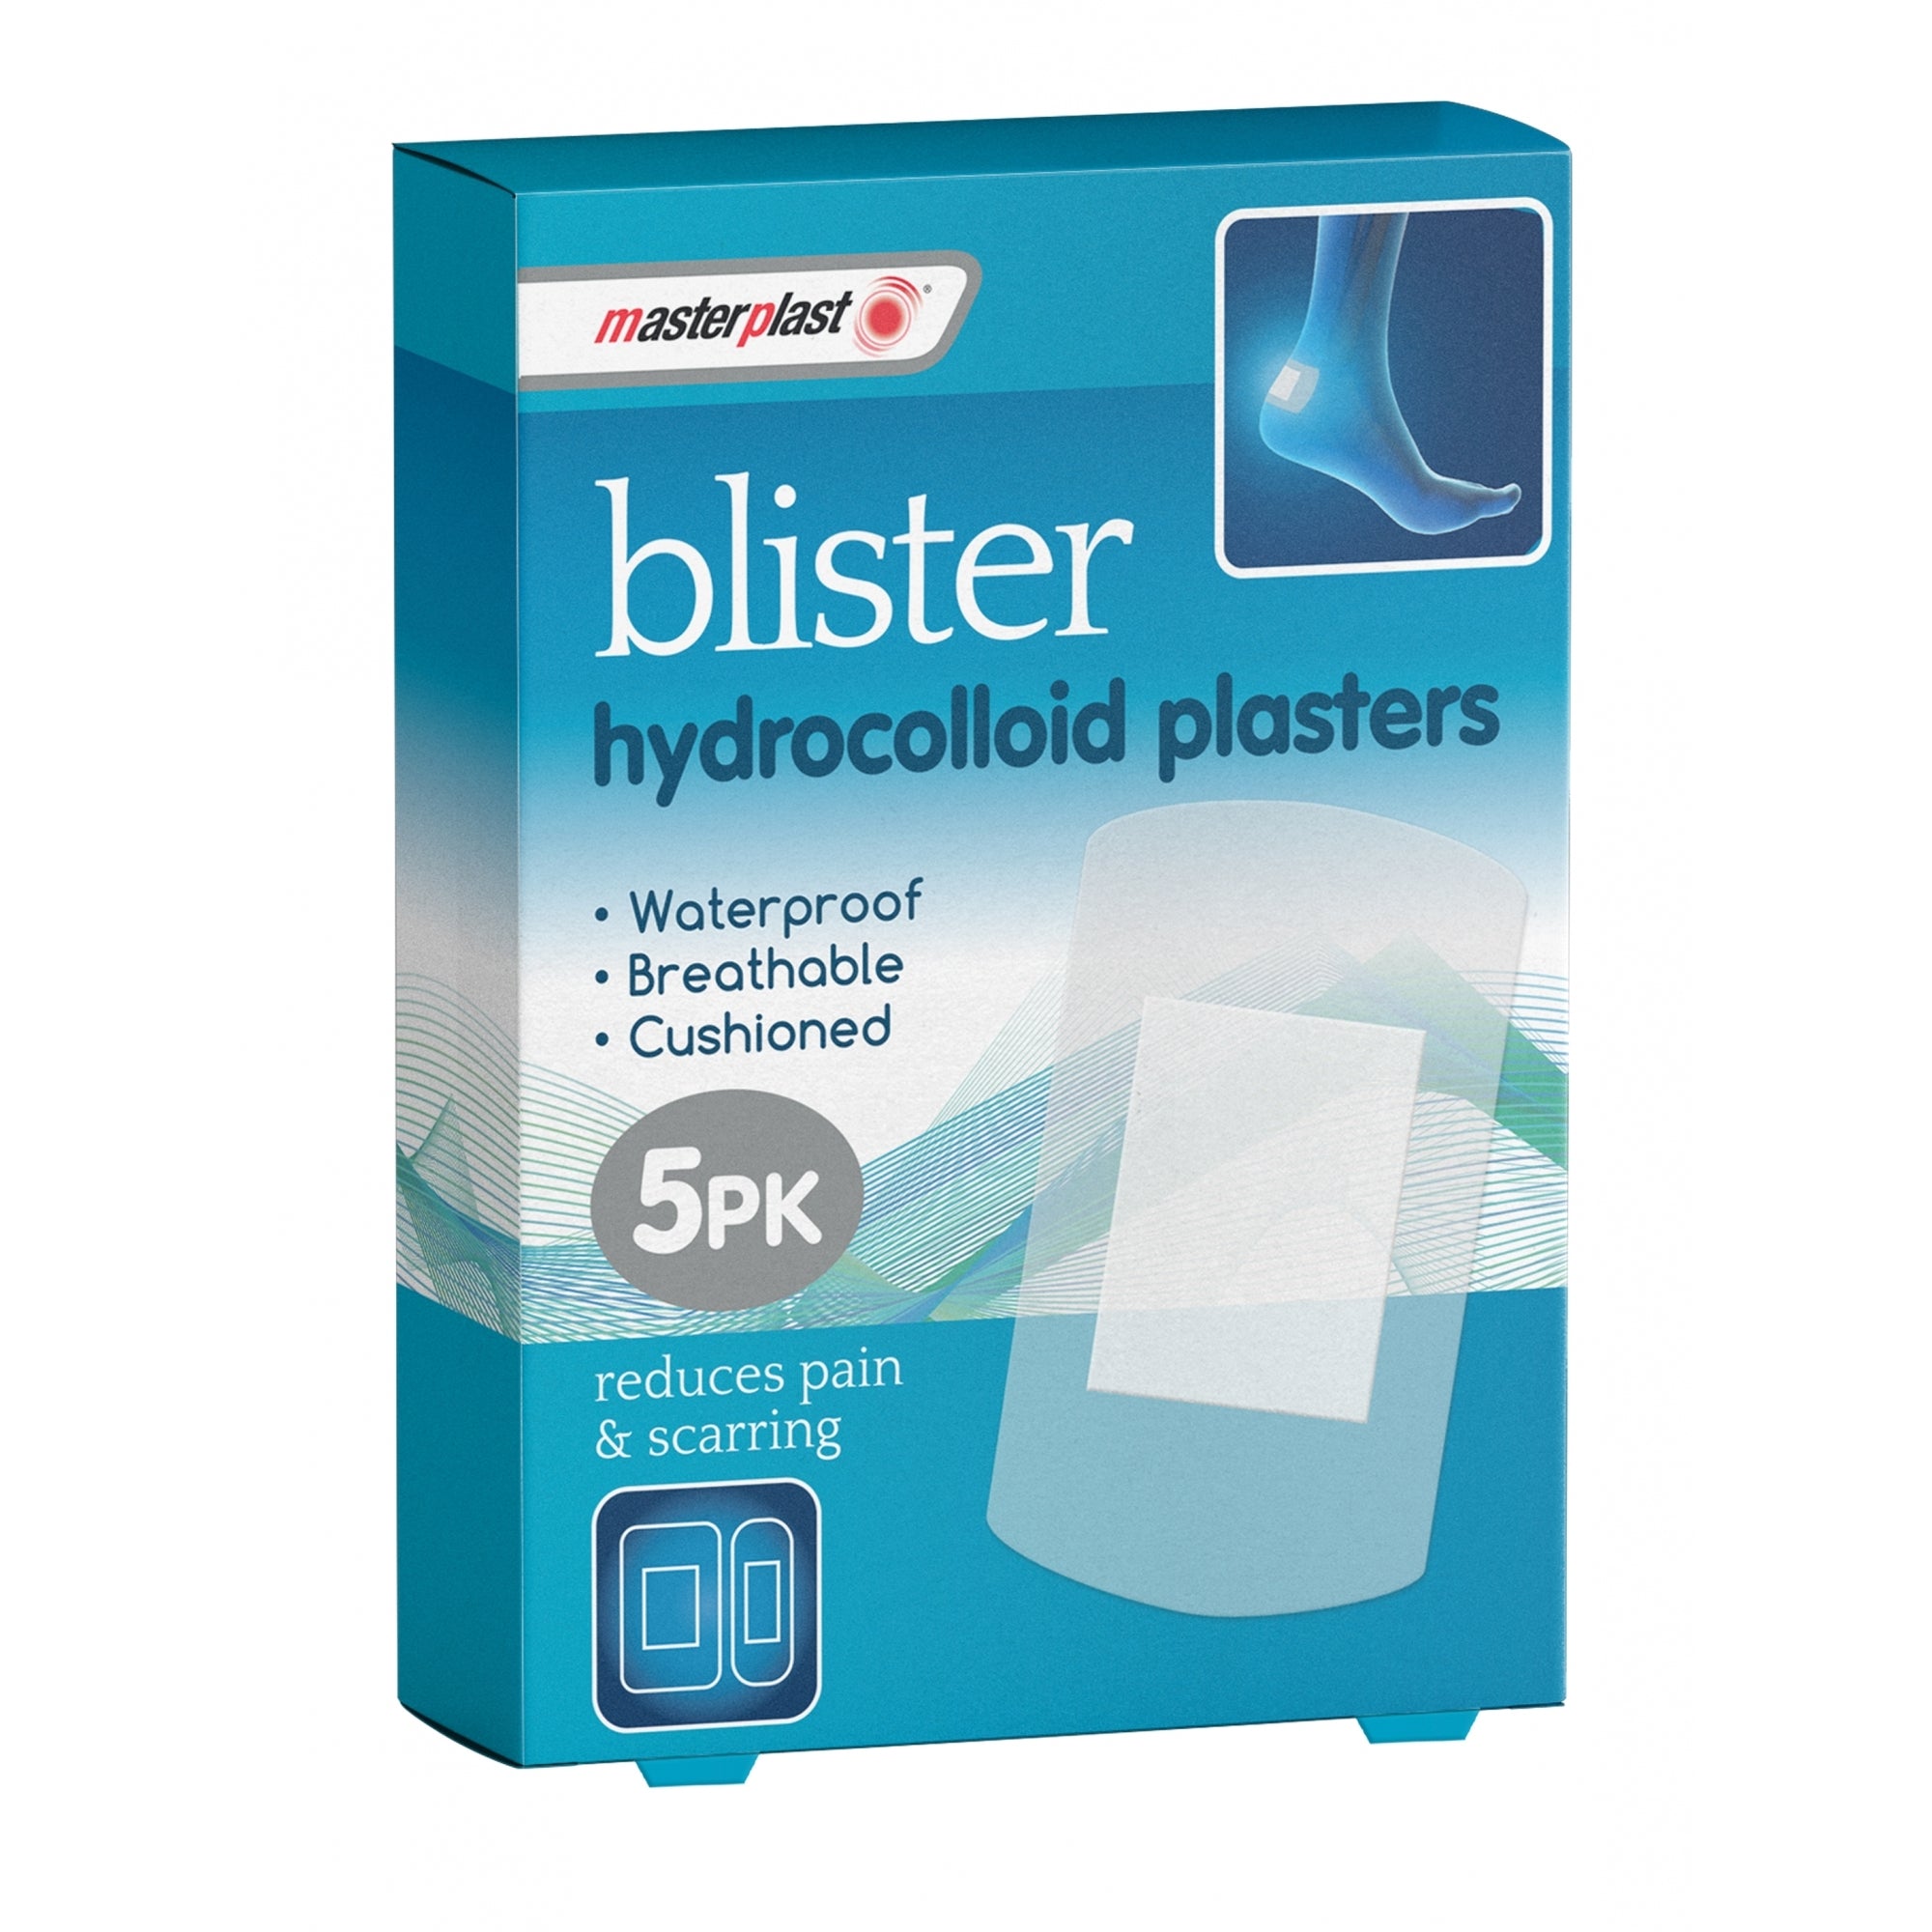 Pack of 5 Hydrocolloid Blister Plasters by Master Plast